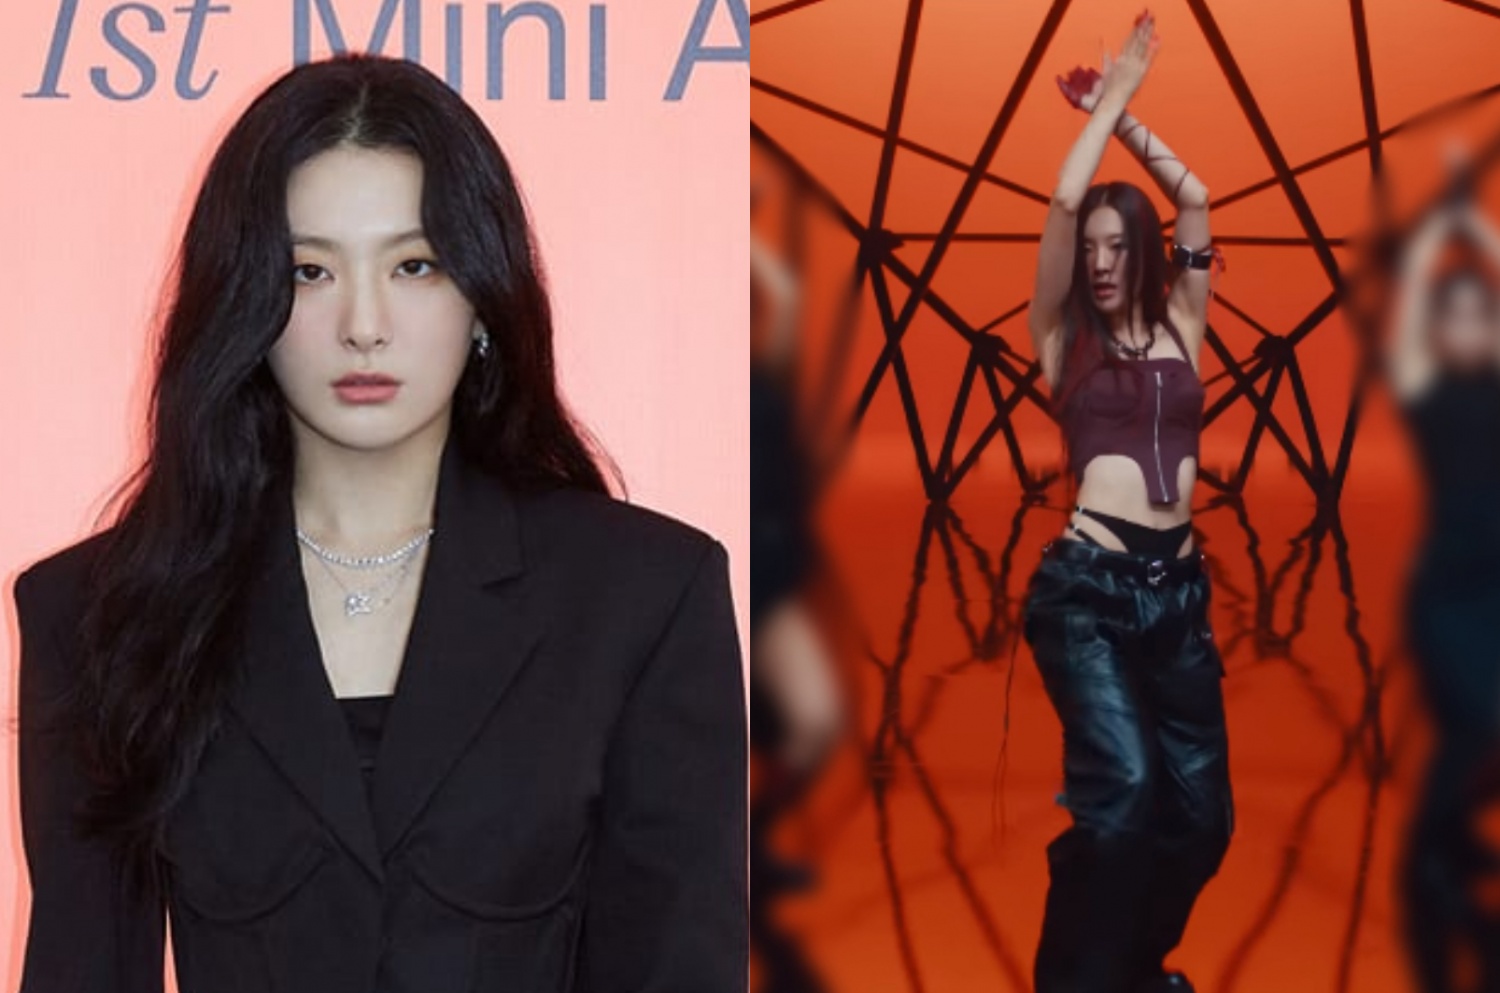 Red Velvet Seulgi Fashion: Here are excerpts from one of her MV “28 Reasons” outfits